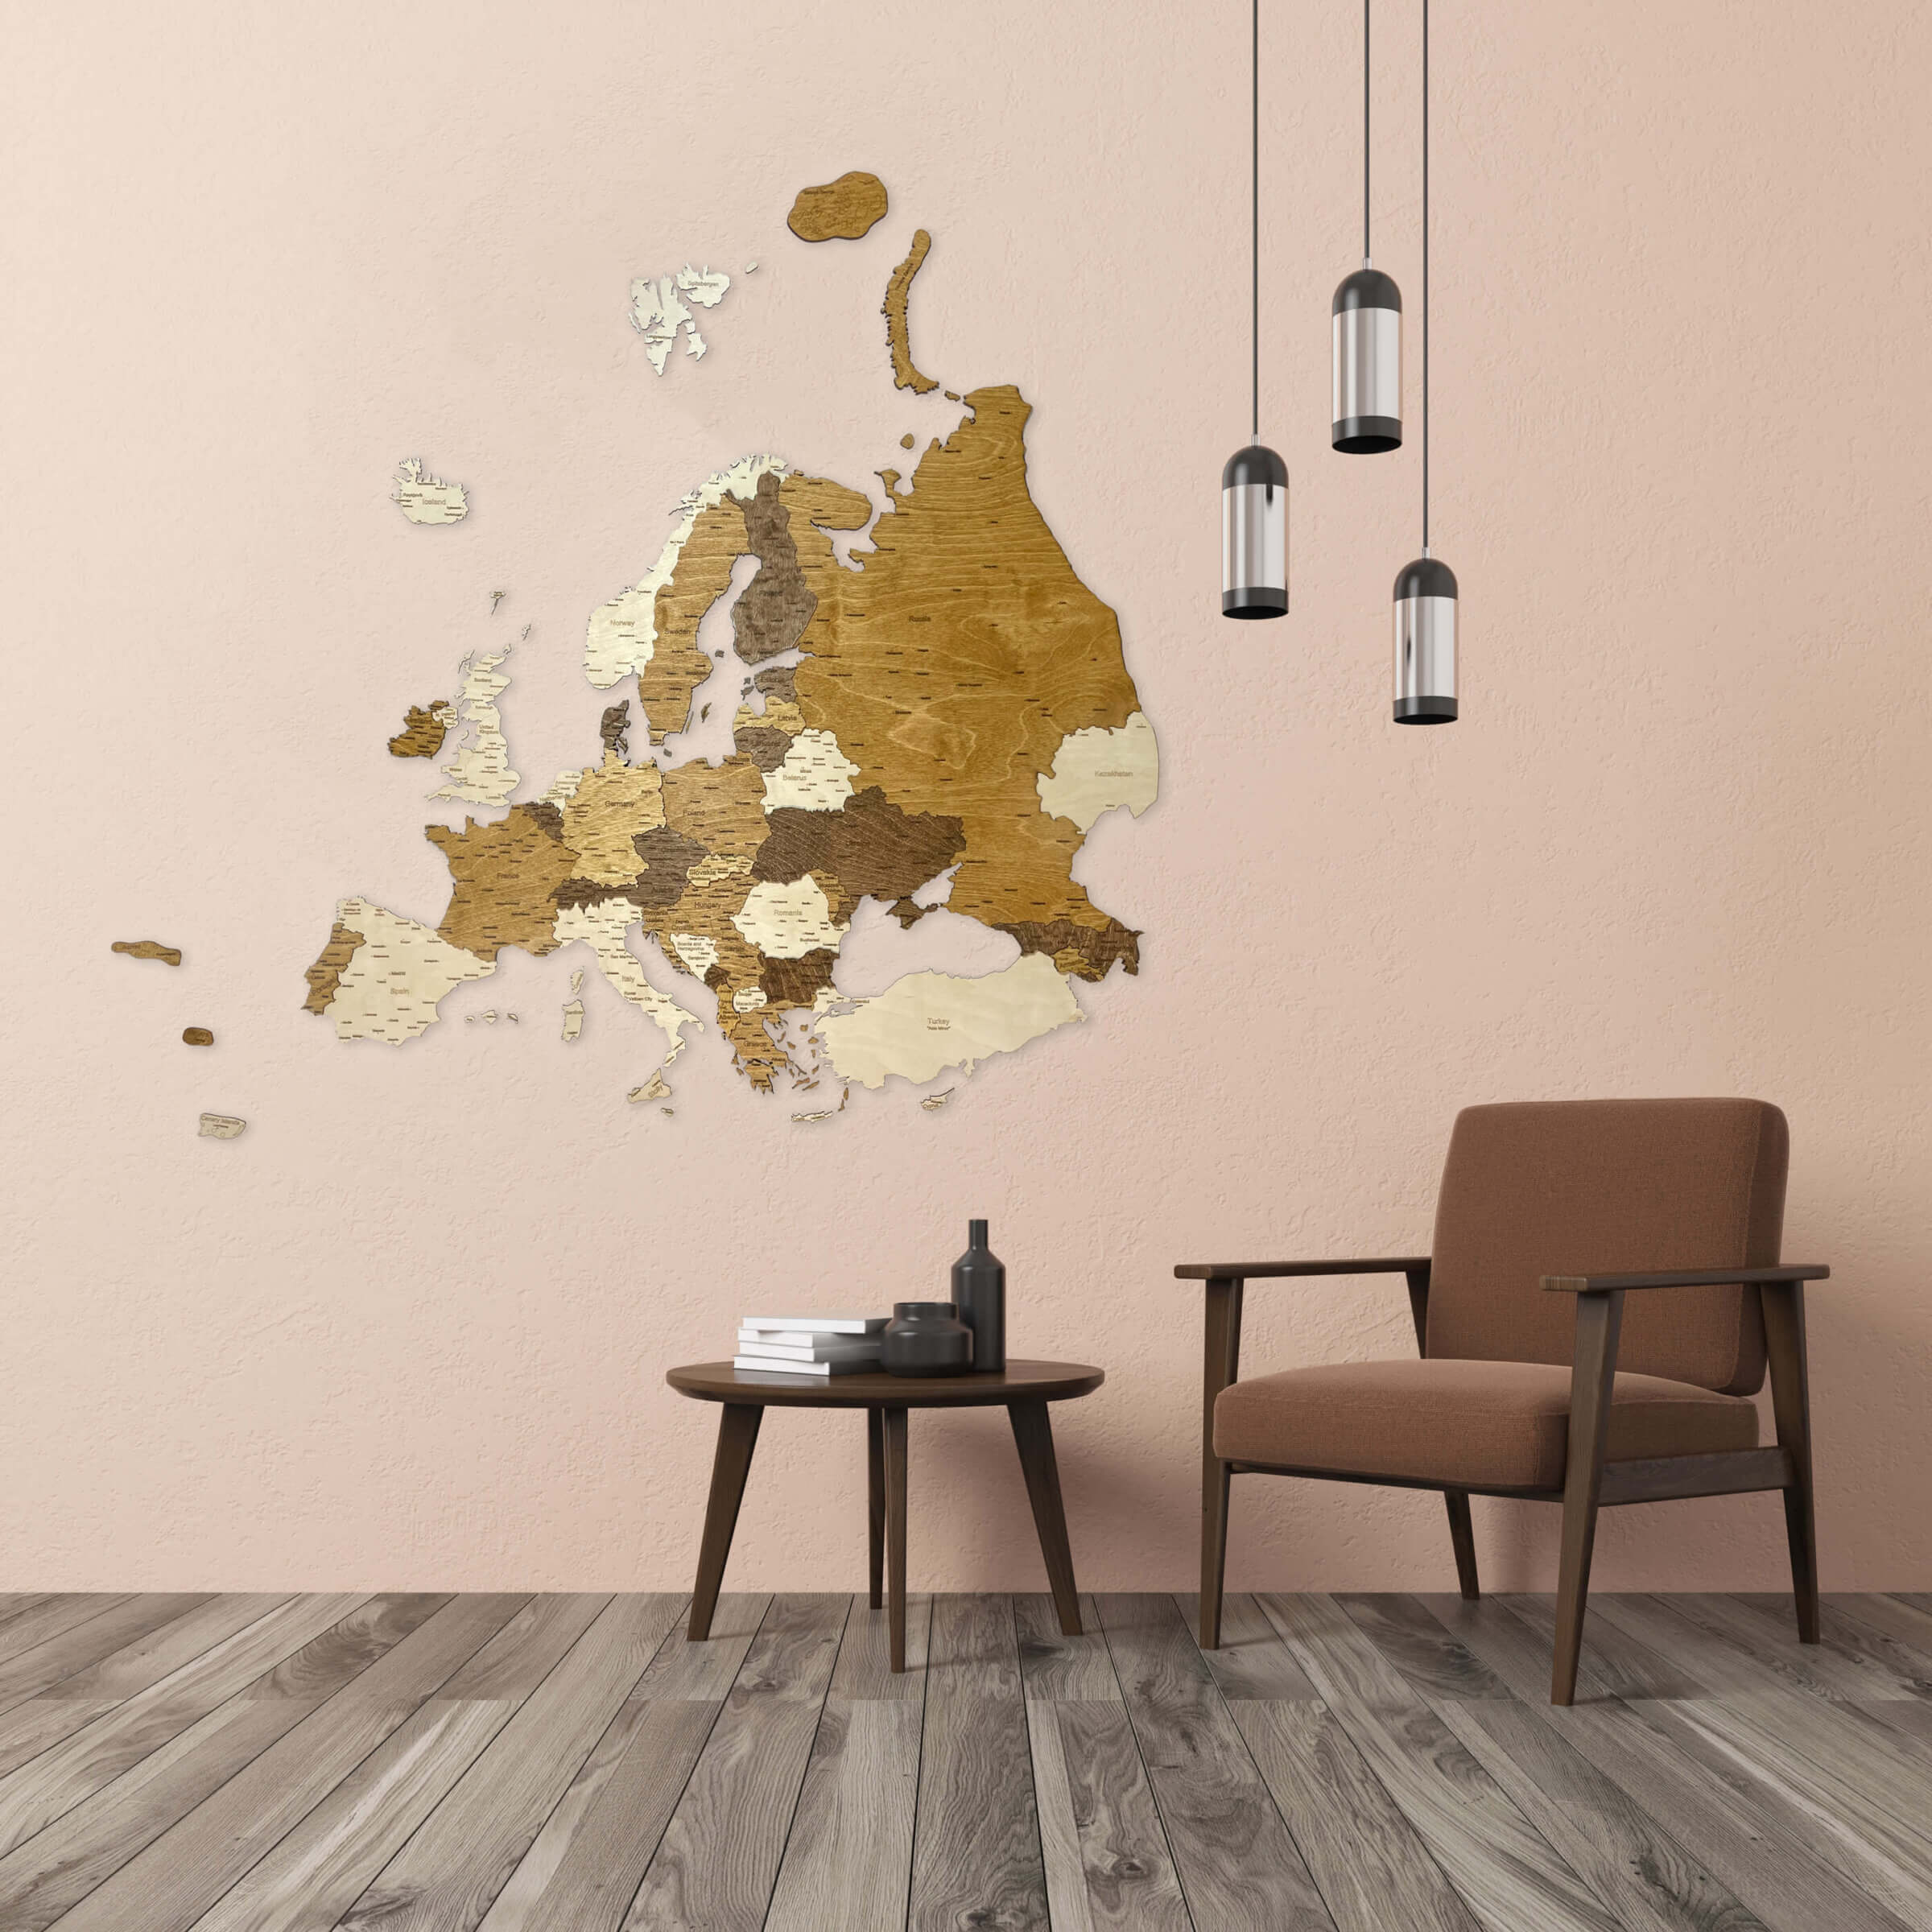 3D Wooden Map of Europe - Wall Decoration